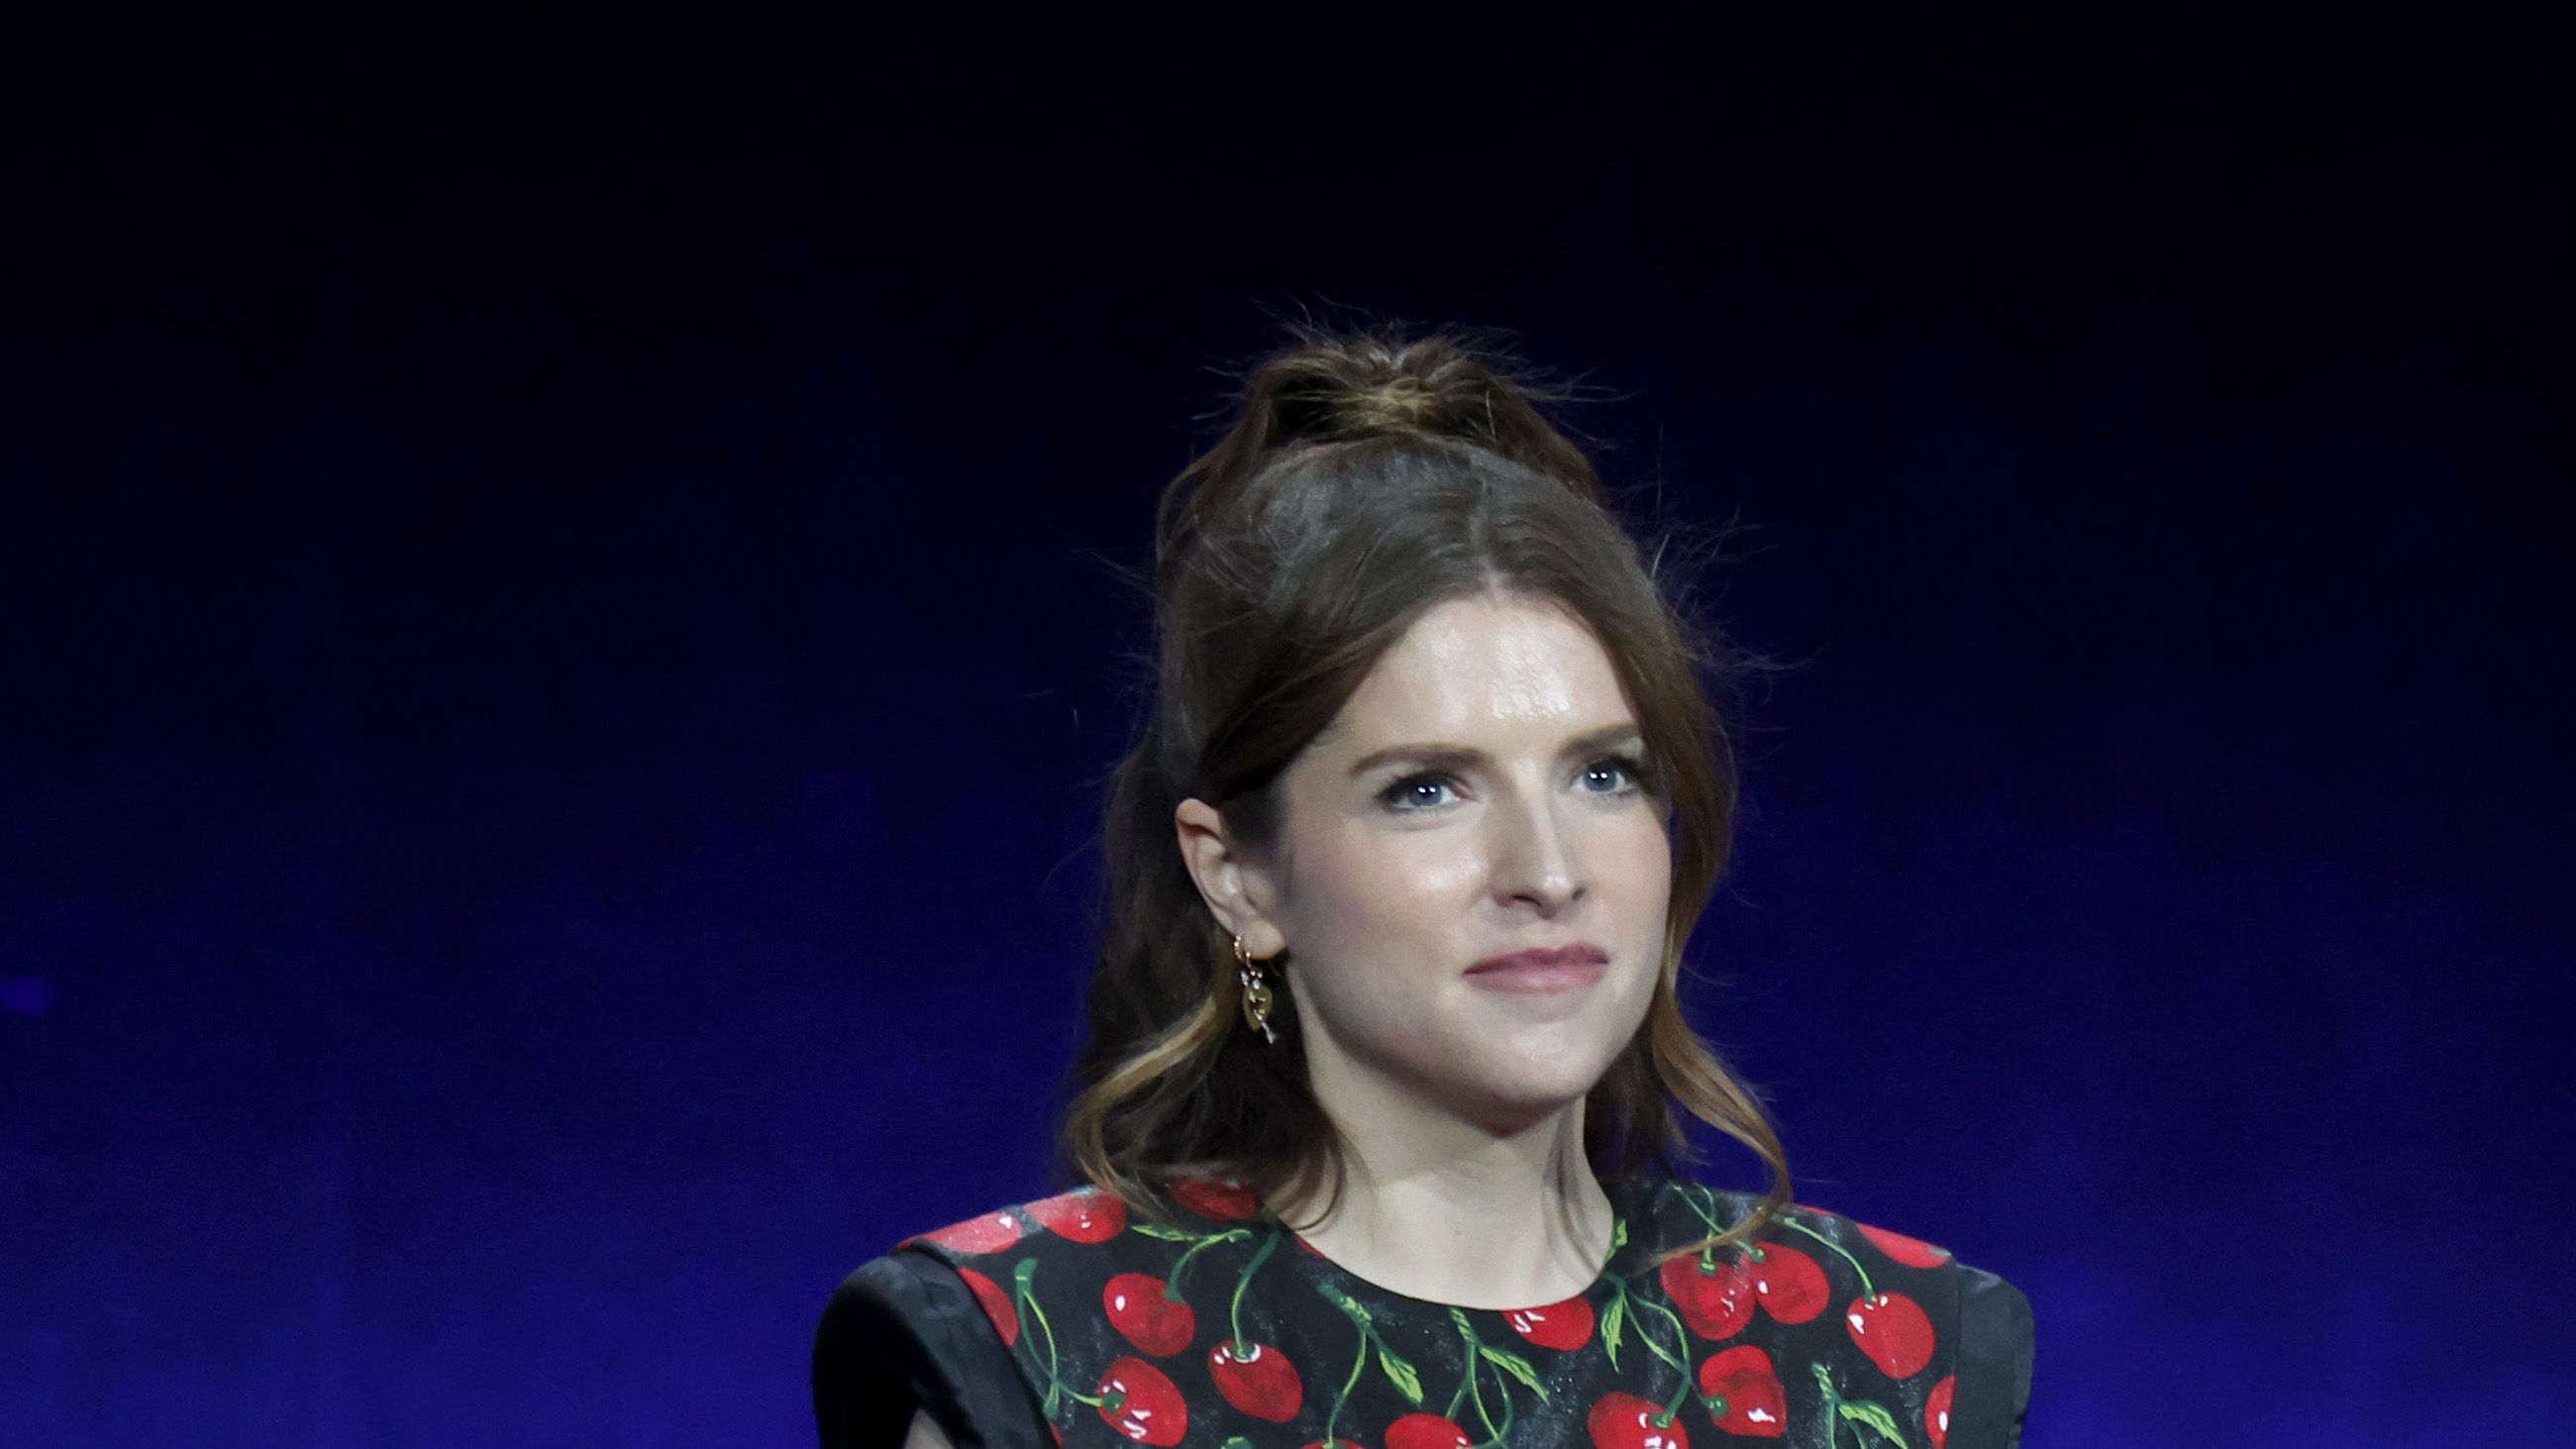 diane kervin share naked pictures of anna kendrick photos